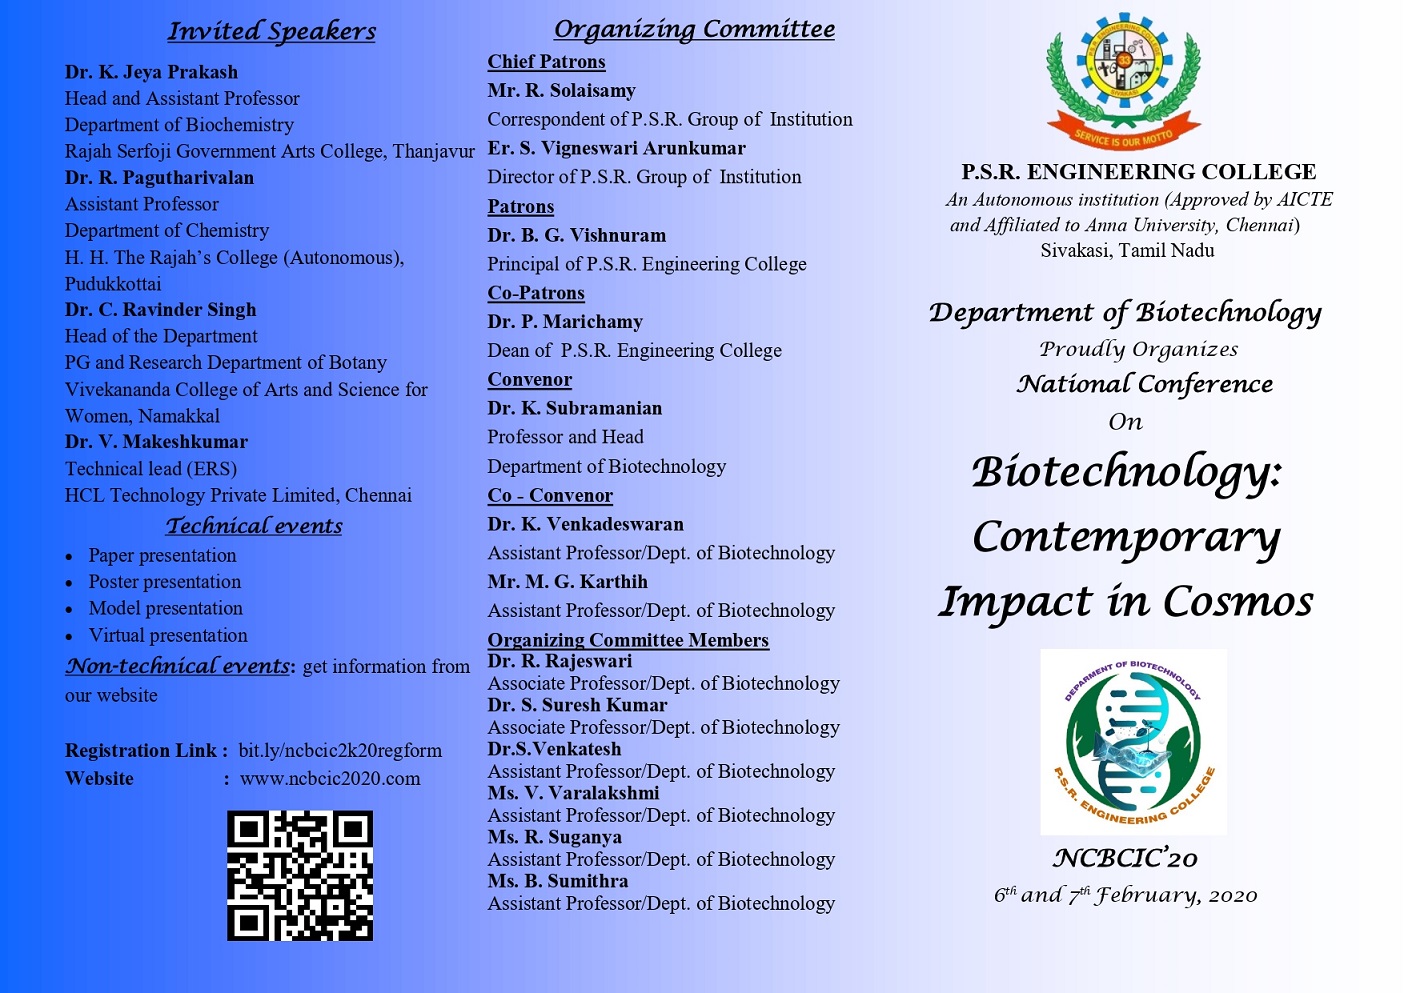 National Conference on Biotechnology:Contemporary Impact in Cosmos NCBCIC 20